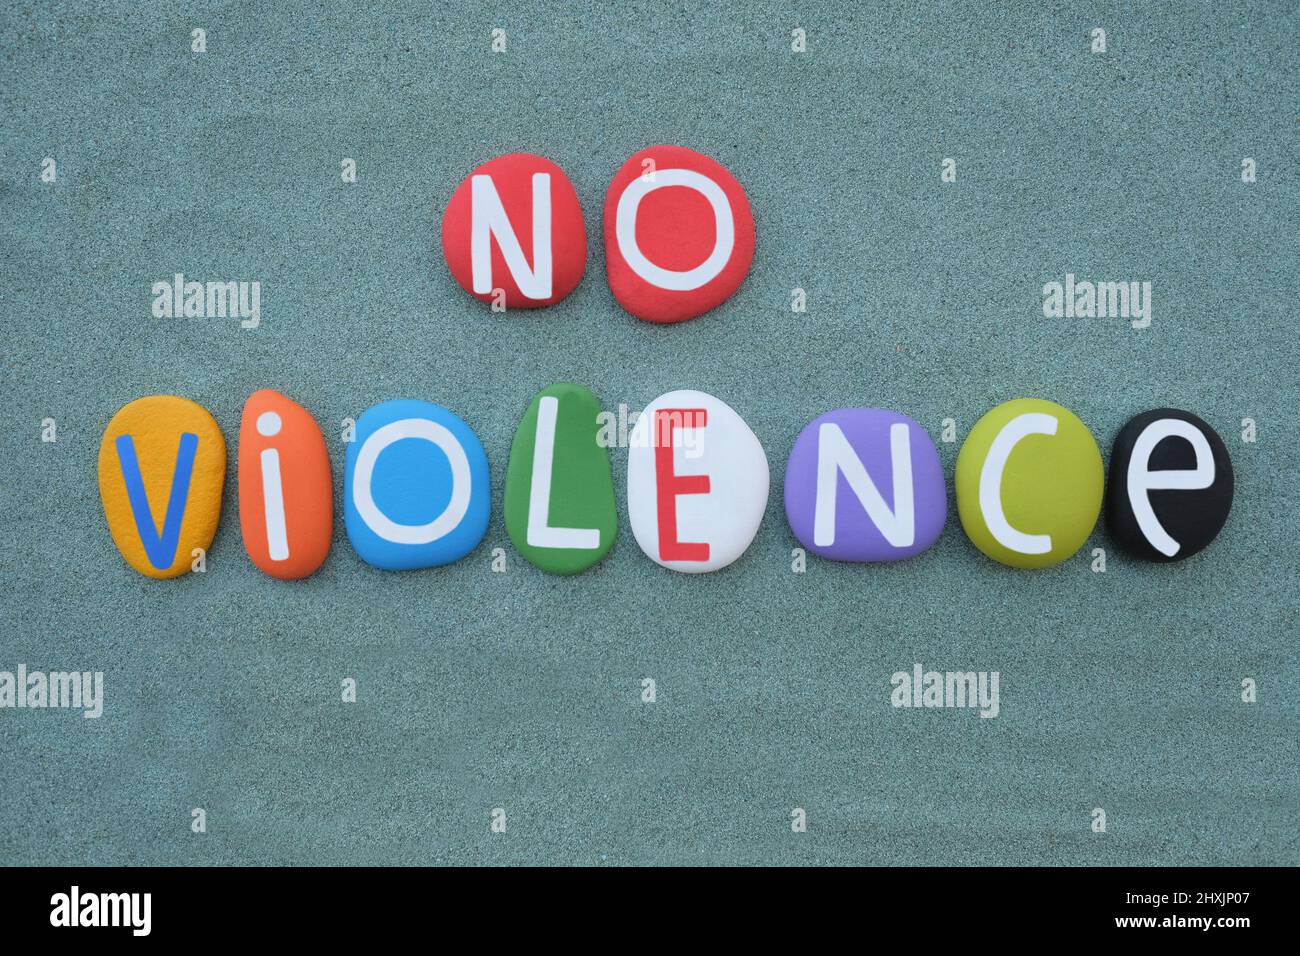 No violence, creative social slogan composed with hand painted multi colored stone letters over green sand Stock Photo